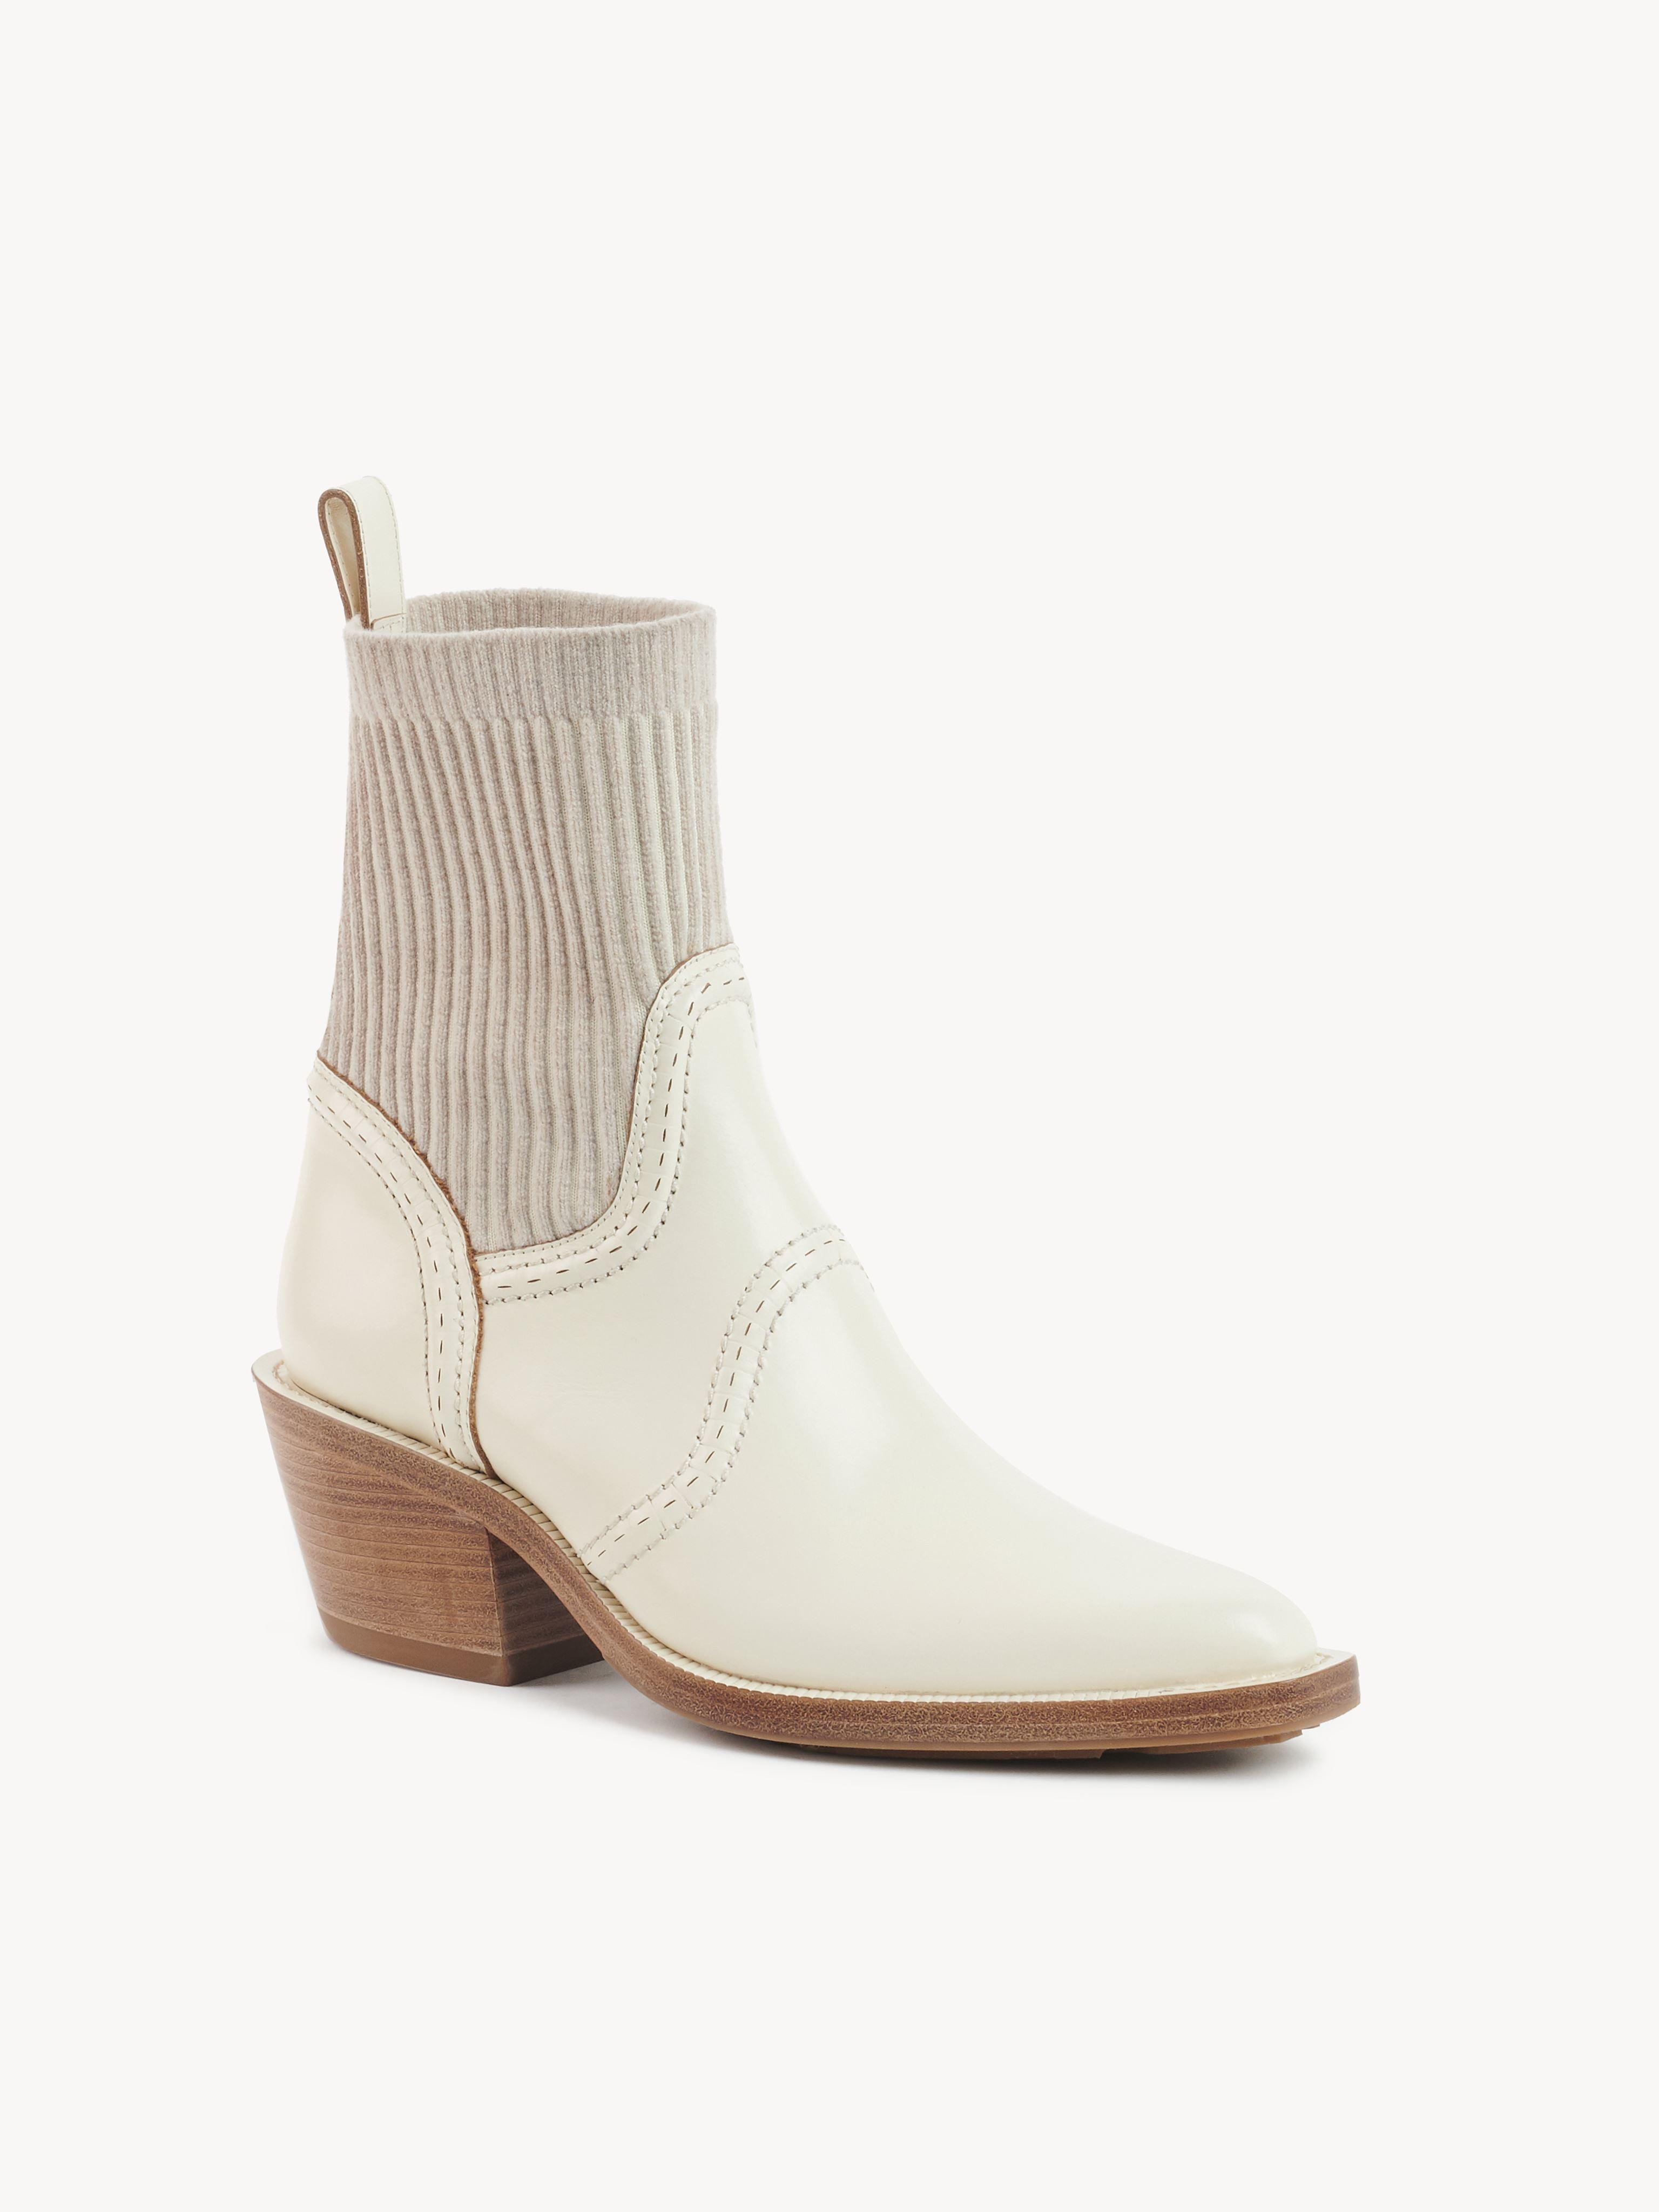 Chloé Nellie Texan Ankle Boot in White | Lyst